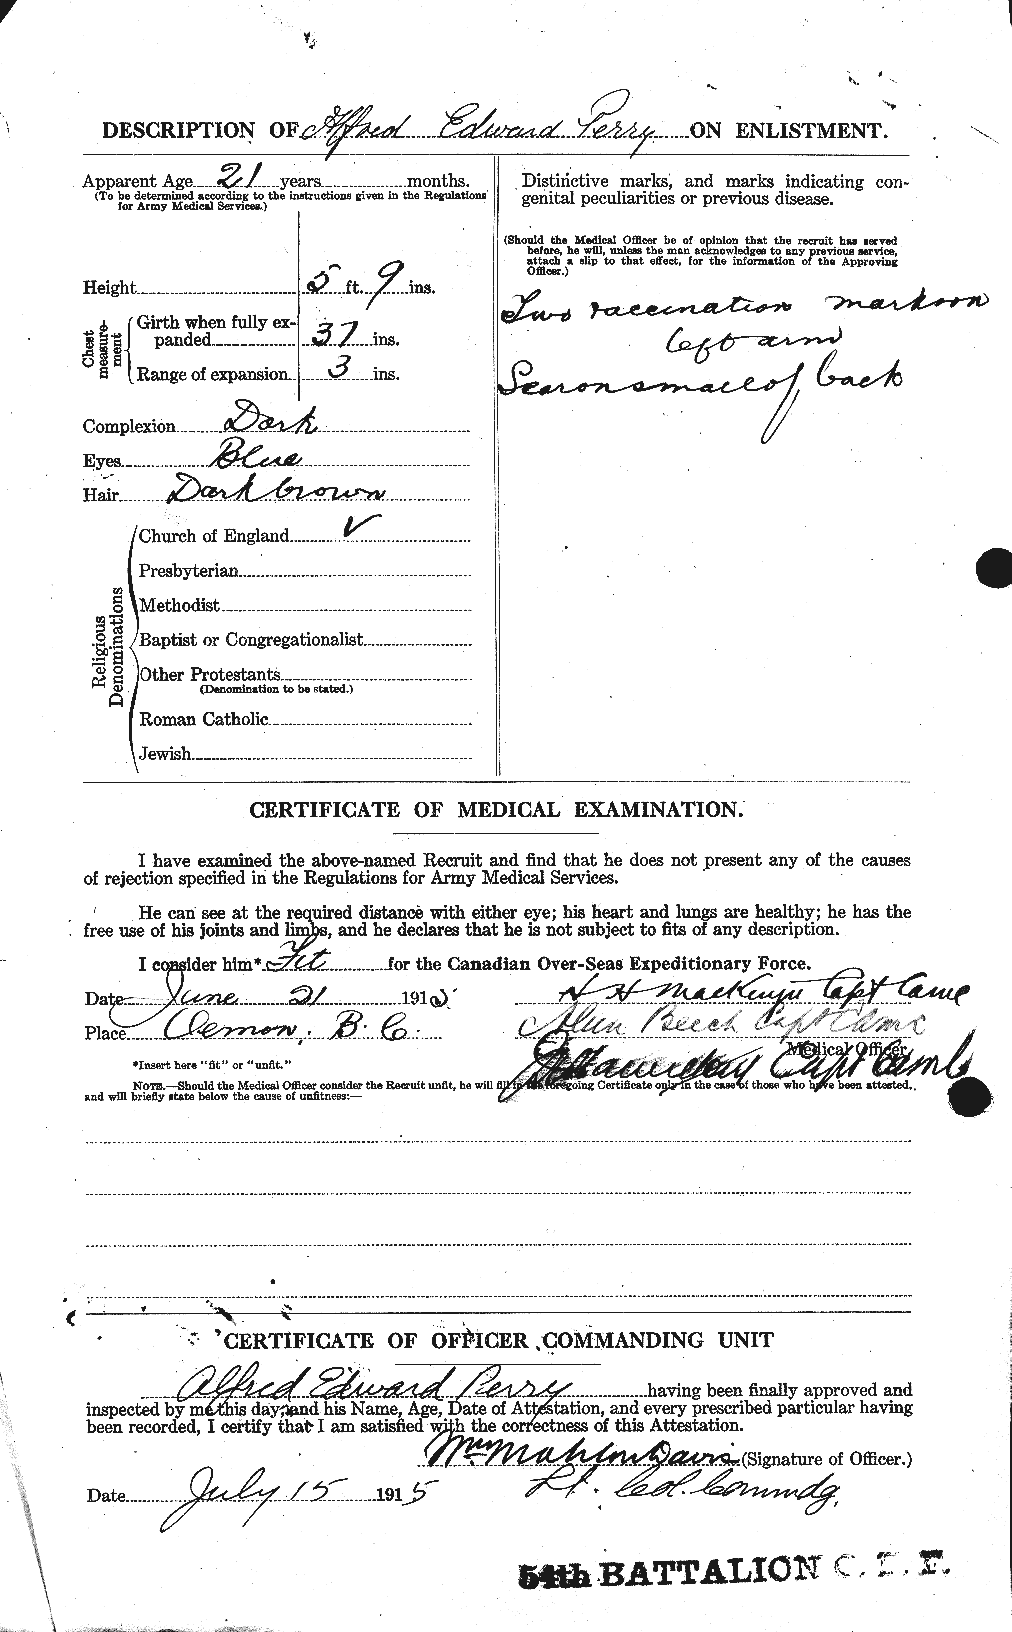 Personnel Records of the First World War - CEF 574701b